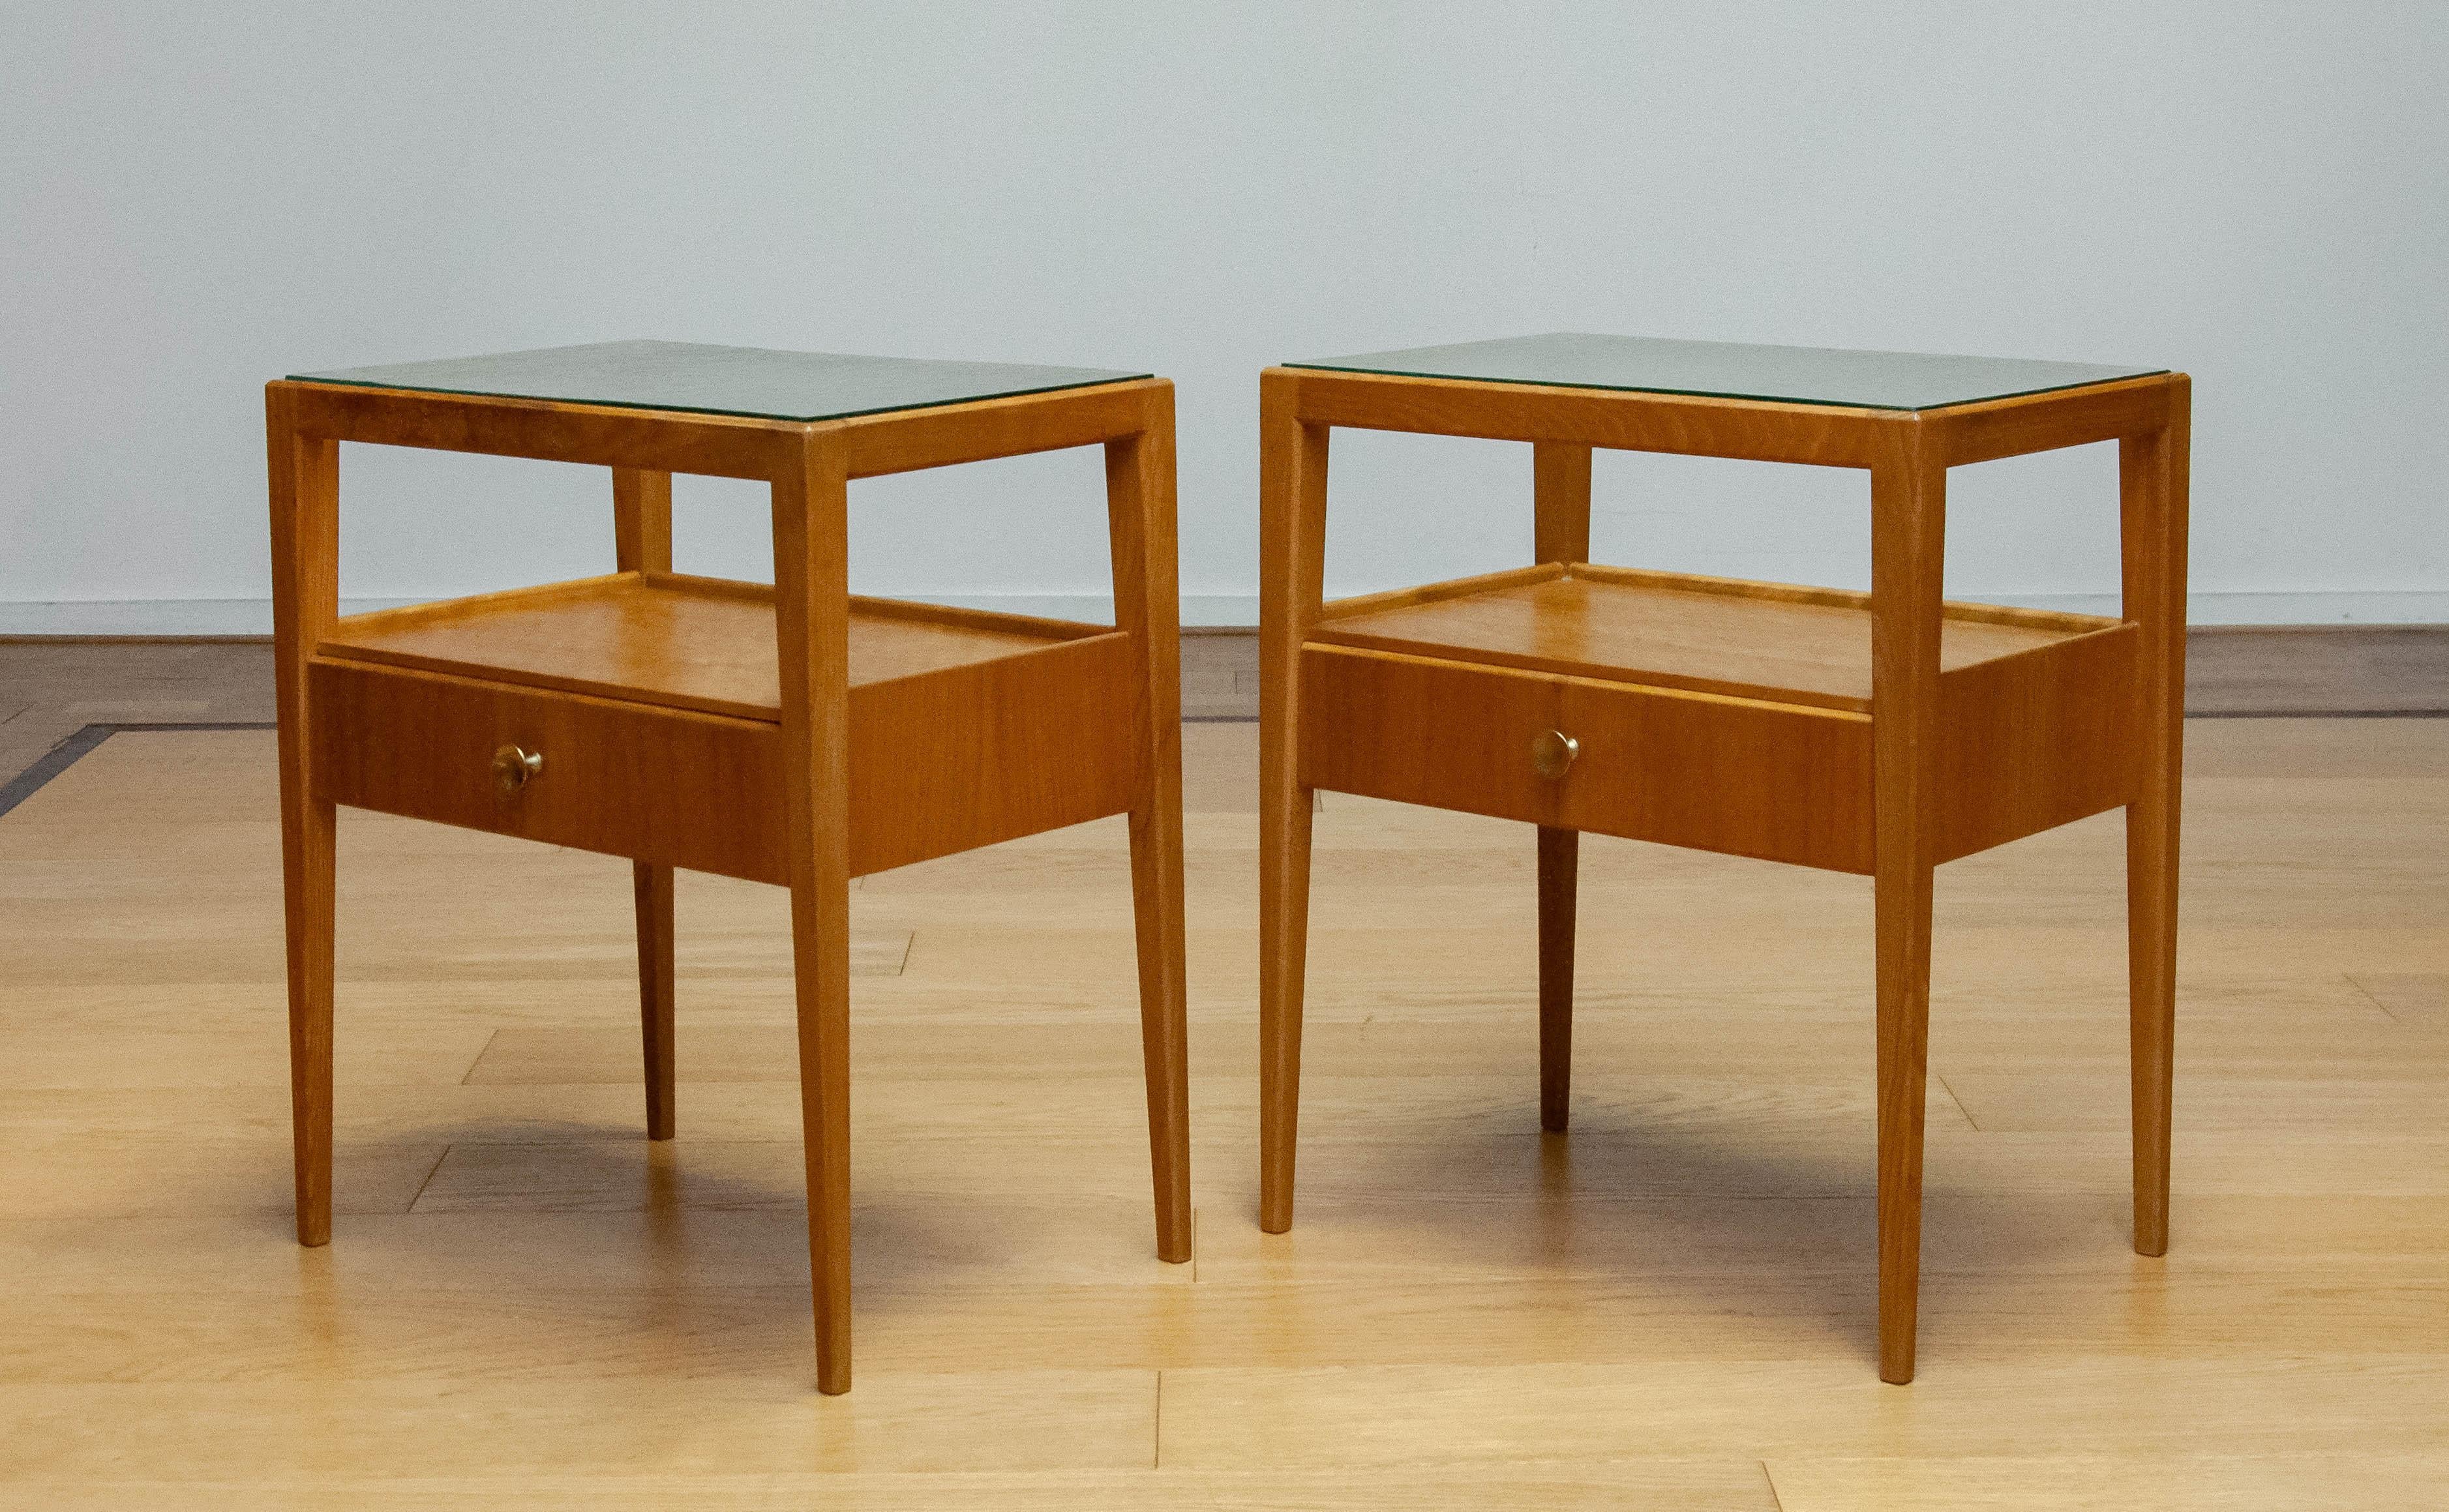 1950s Pair Bedside Tables In Elm With Glass Top By Carl-Axel Acking For Bodafors In Good Condition For Sale In Silvolde, Gelderland